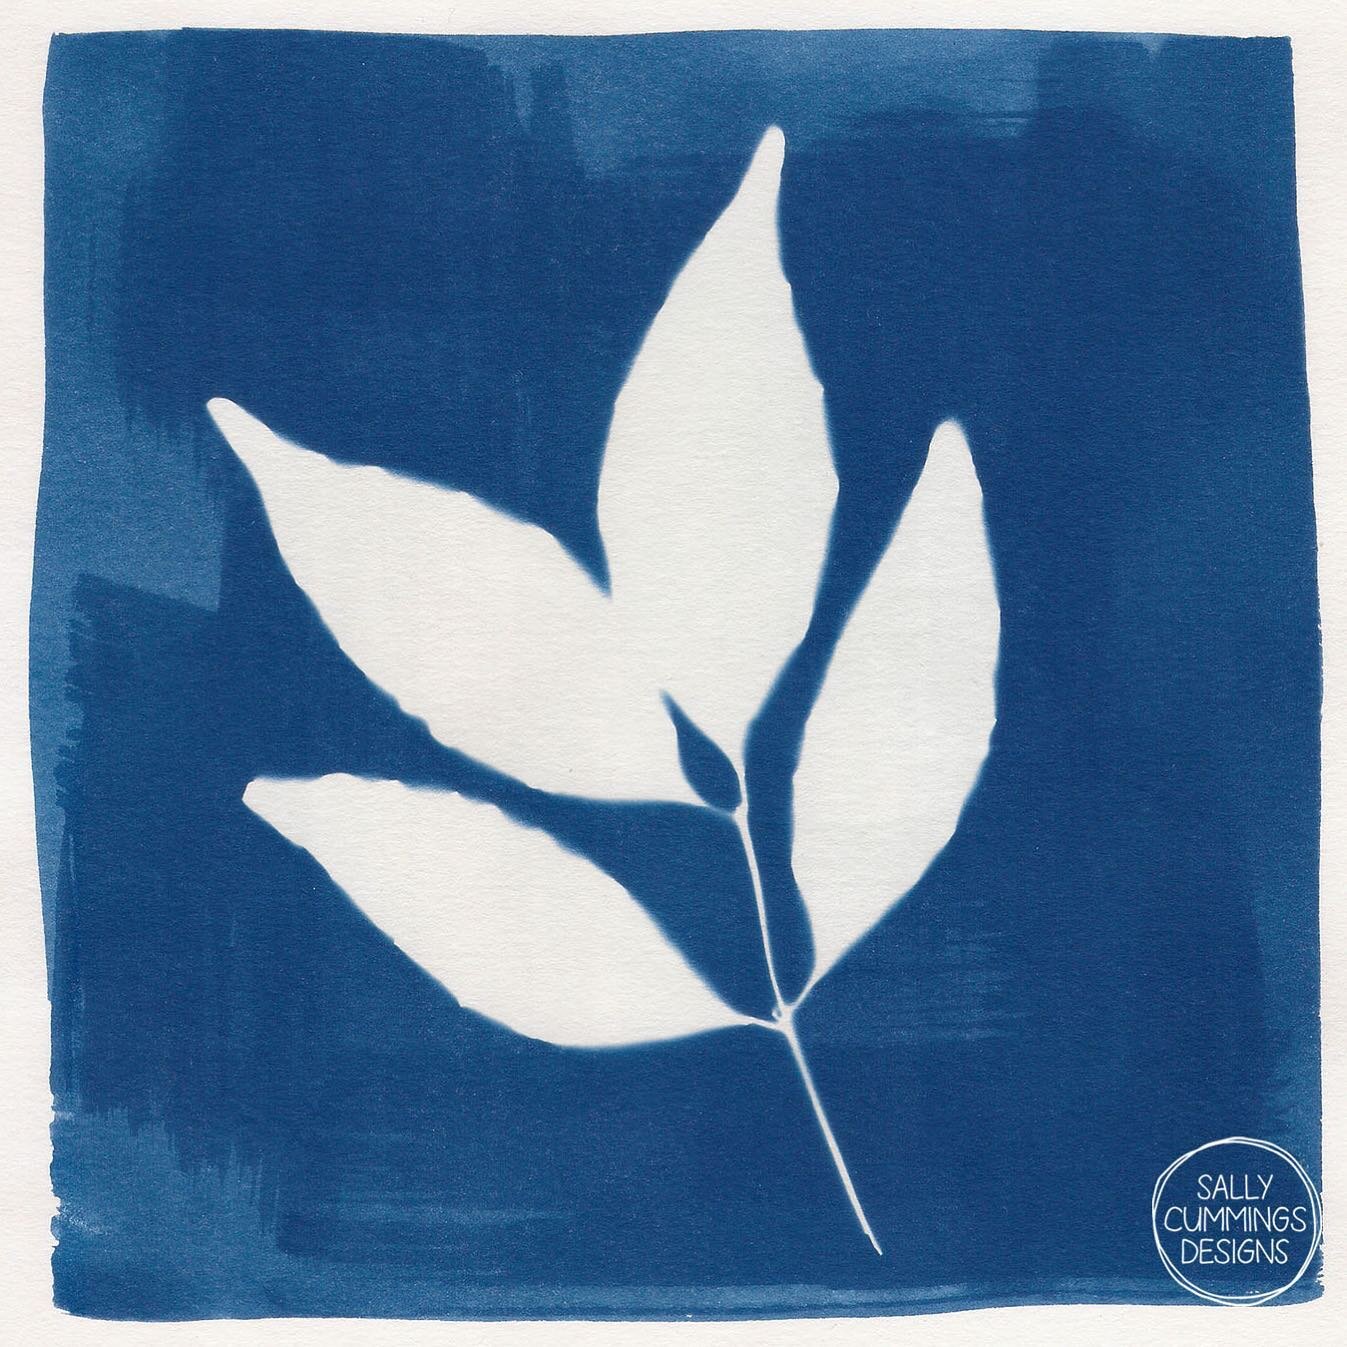 Cyanotype print from May (before I took a break during winter and waited for the sun to return!). Plans are in motion to get professional prints made of some of my best pieces ...

#sallycummingsdesigns #cyanotype #cyanotypeprint